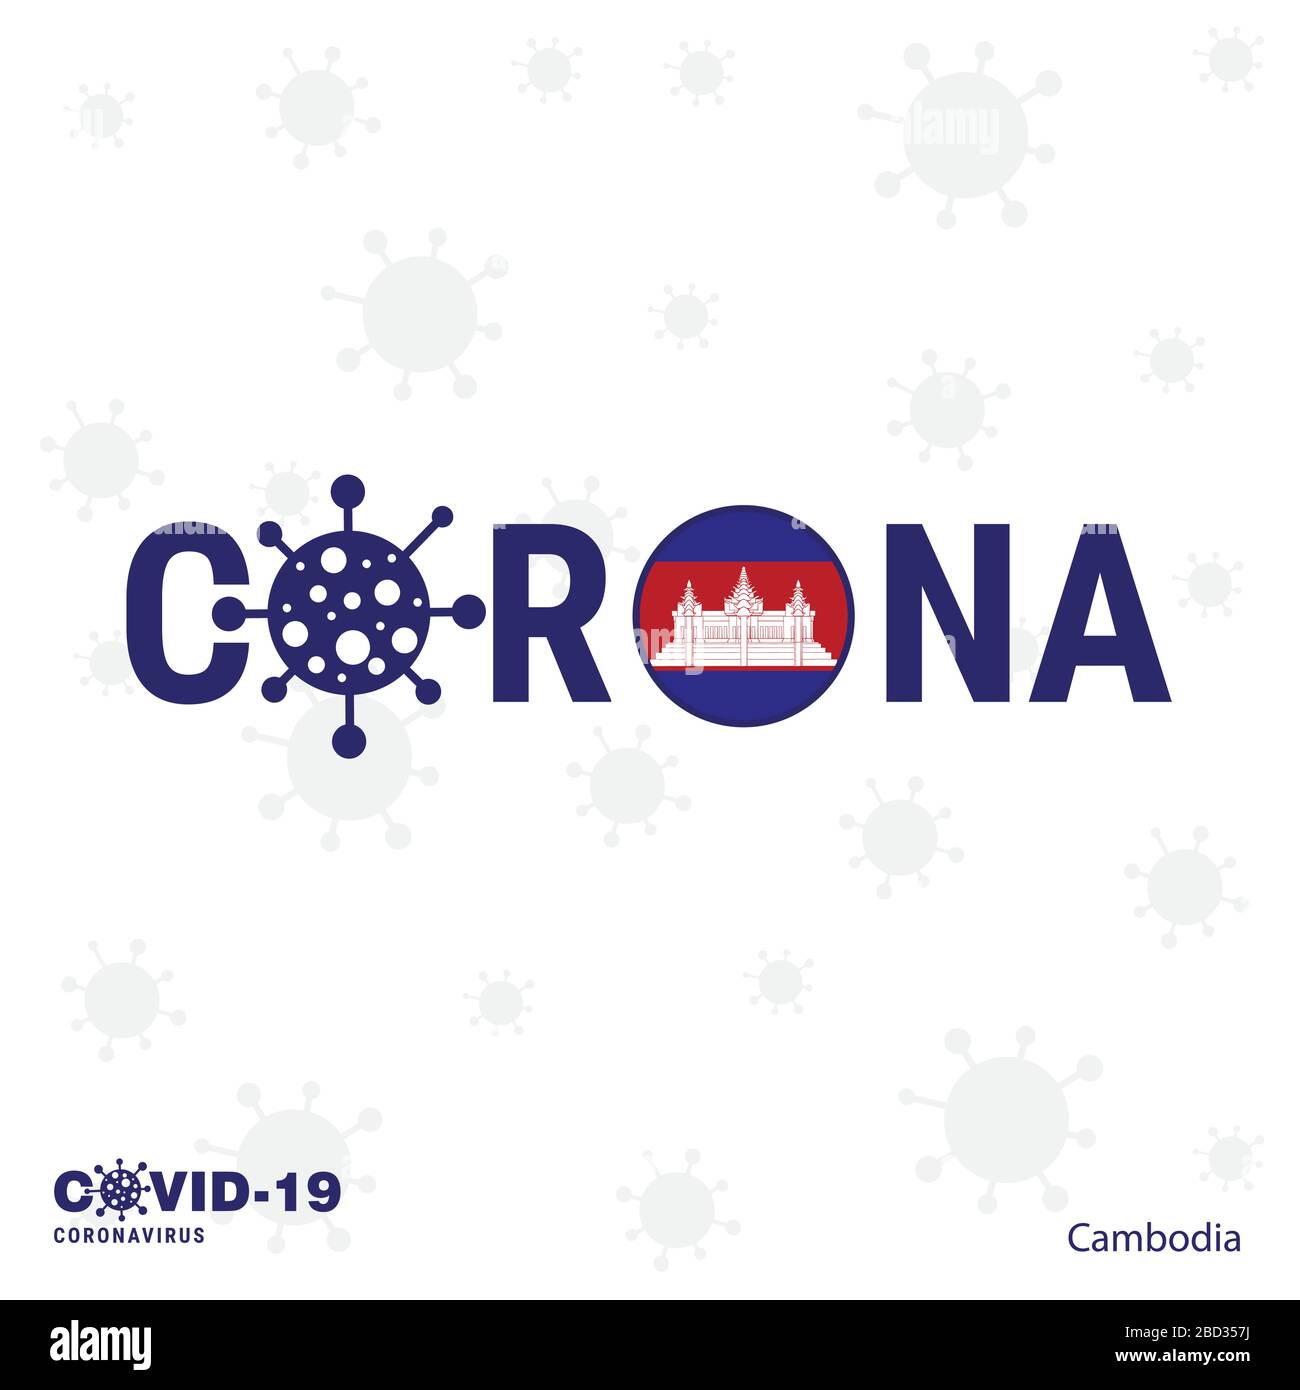 Cambodia Coronavirus Typography. COVID-19 country banner. Stay home, Stay Healthy. Take care of your own health Stock Vector